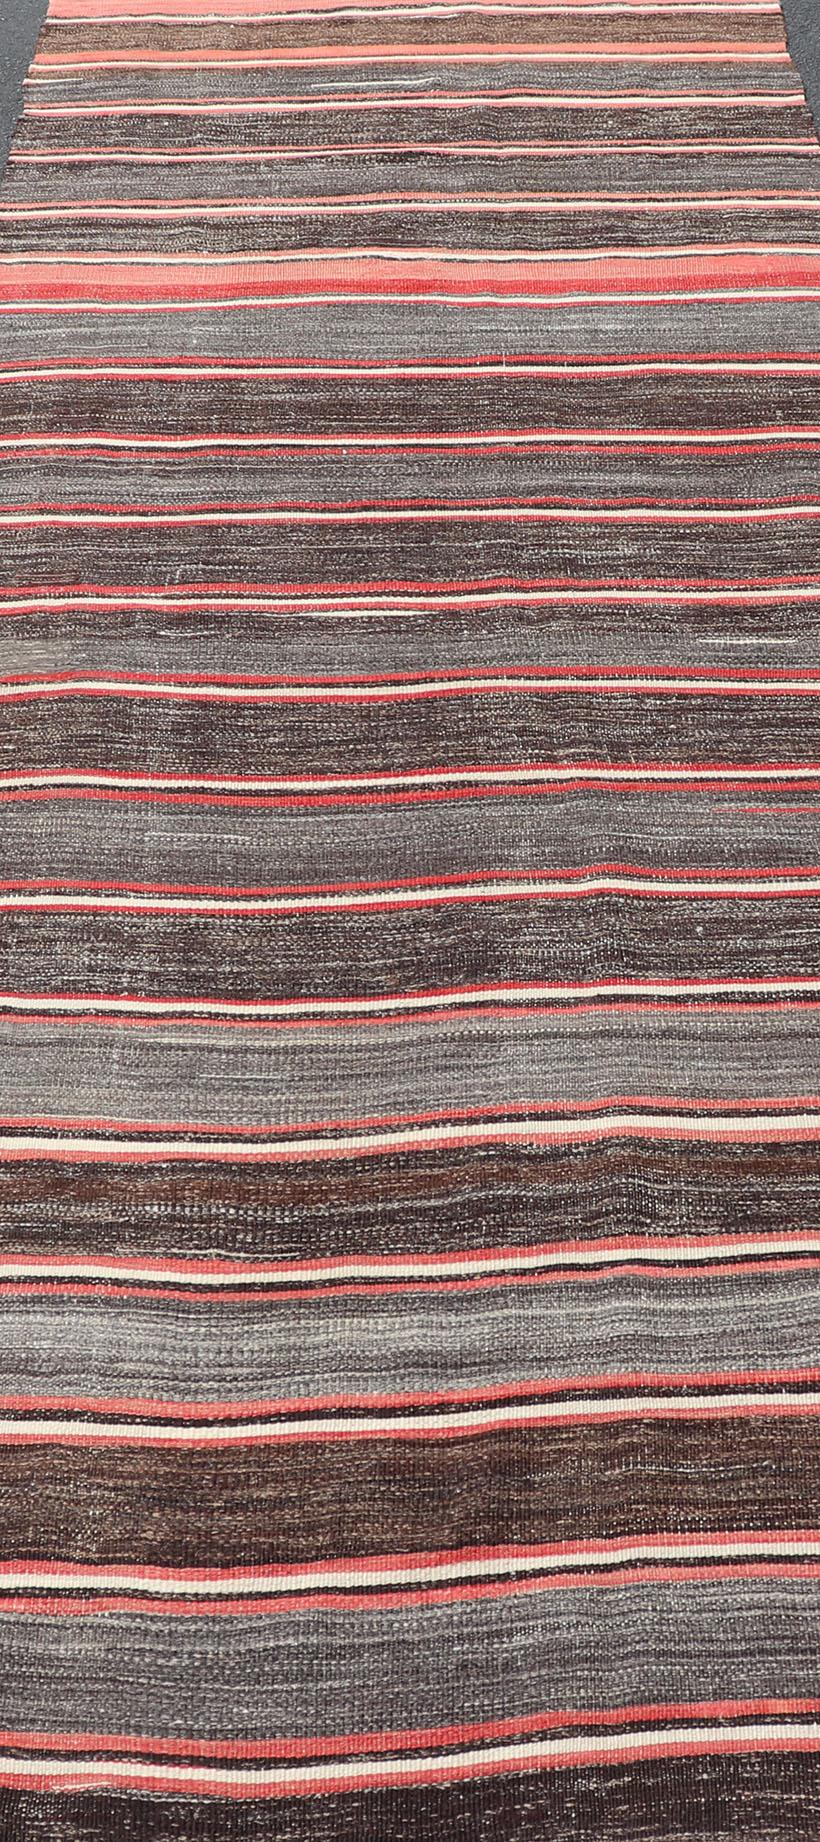 Vintage Turkish Kilim Wide Runner in Gray, Coral, Brown & Charcoal with Stripes 2